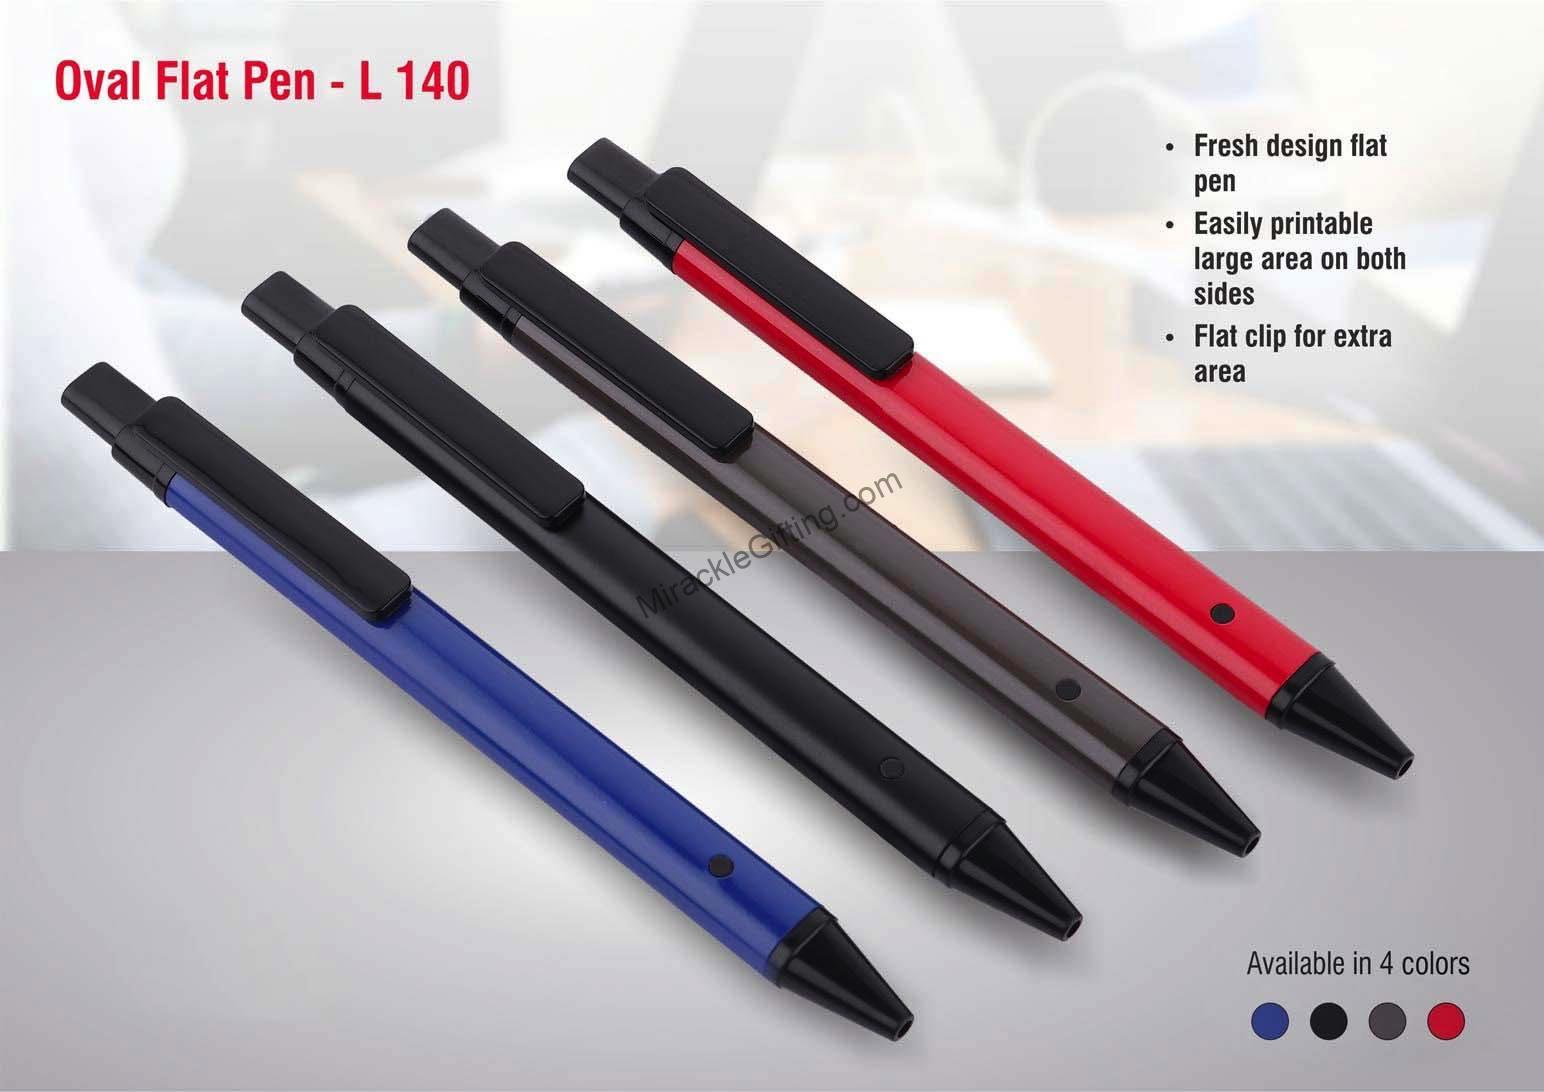 L152 - Picasso: Inkless Pen with Stylus and eraser, Designer Metal body